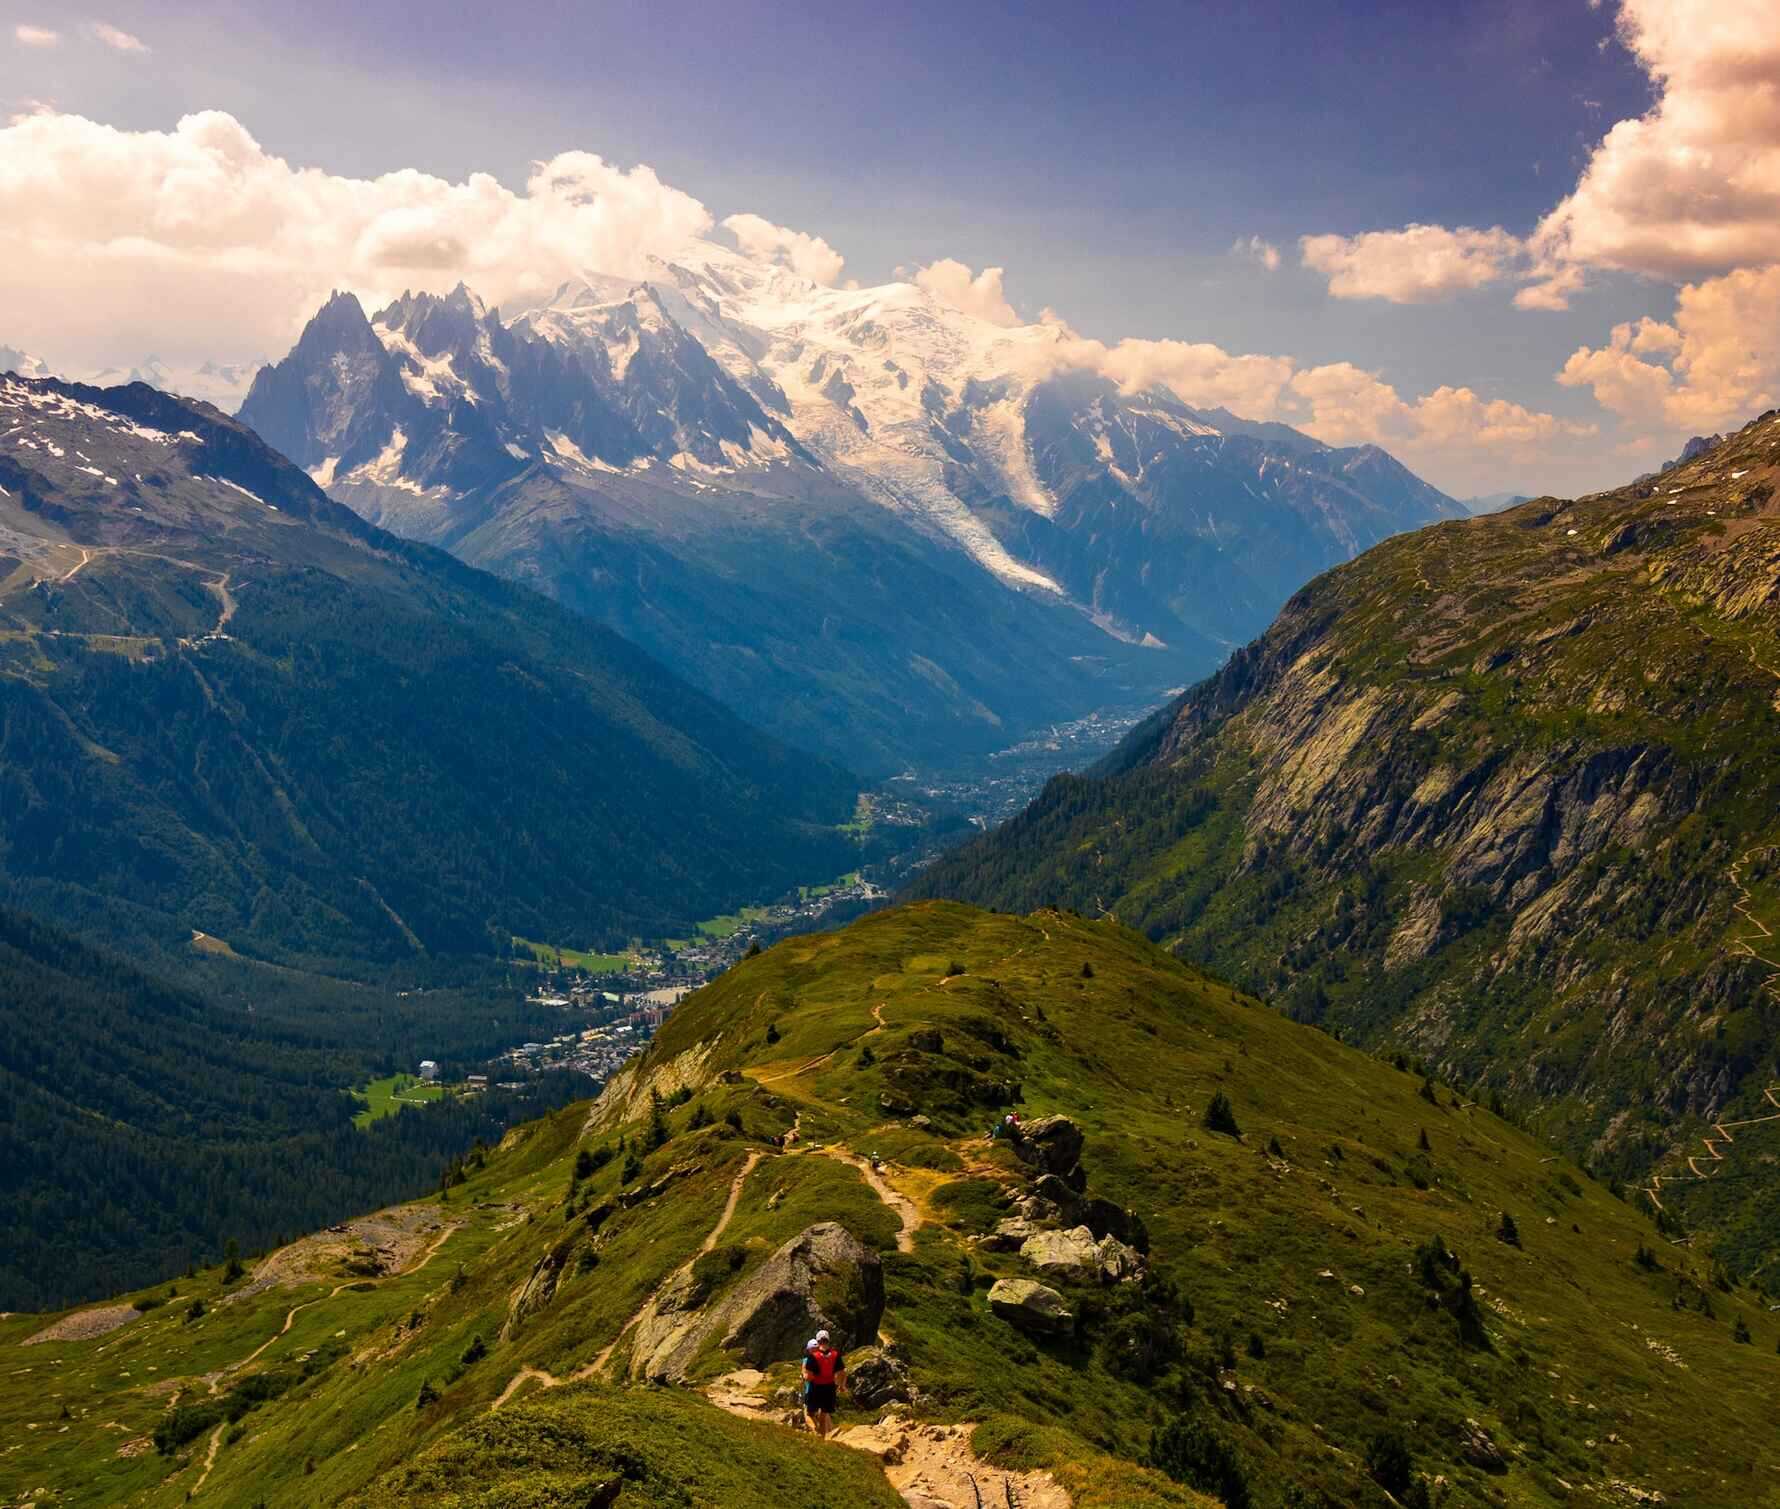 A view of the Chamonix valley